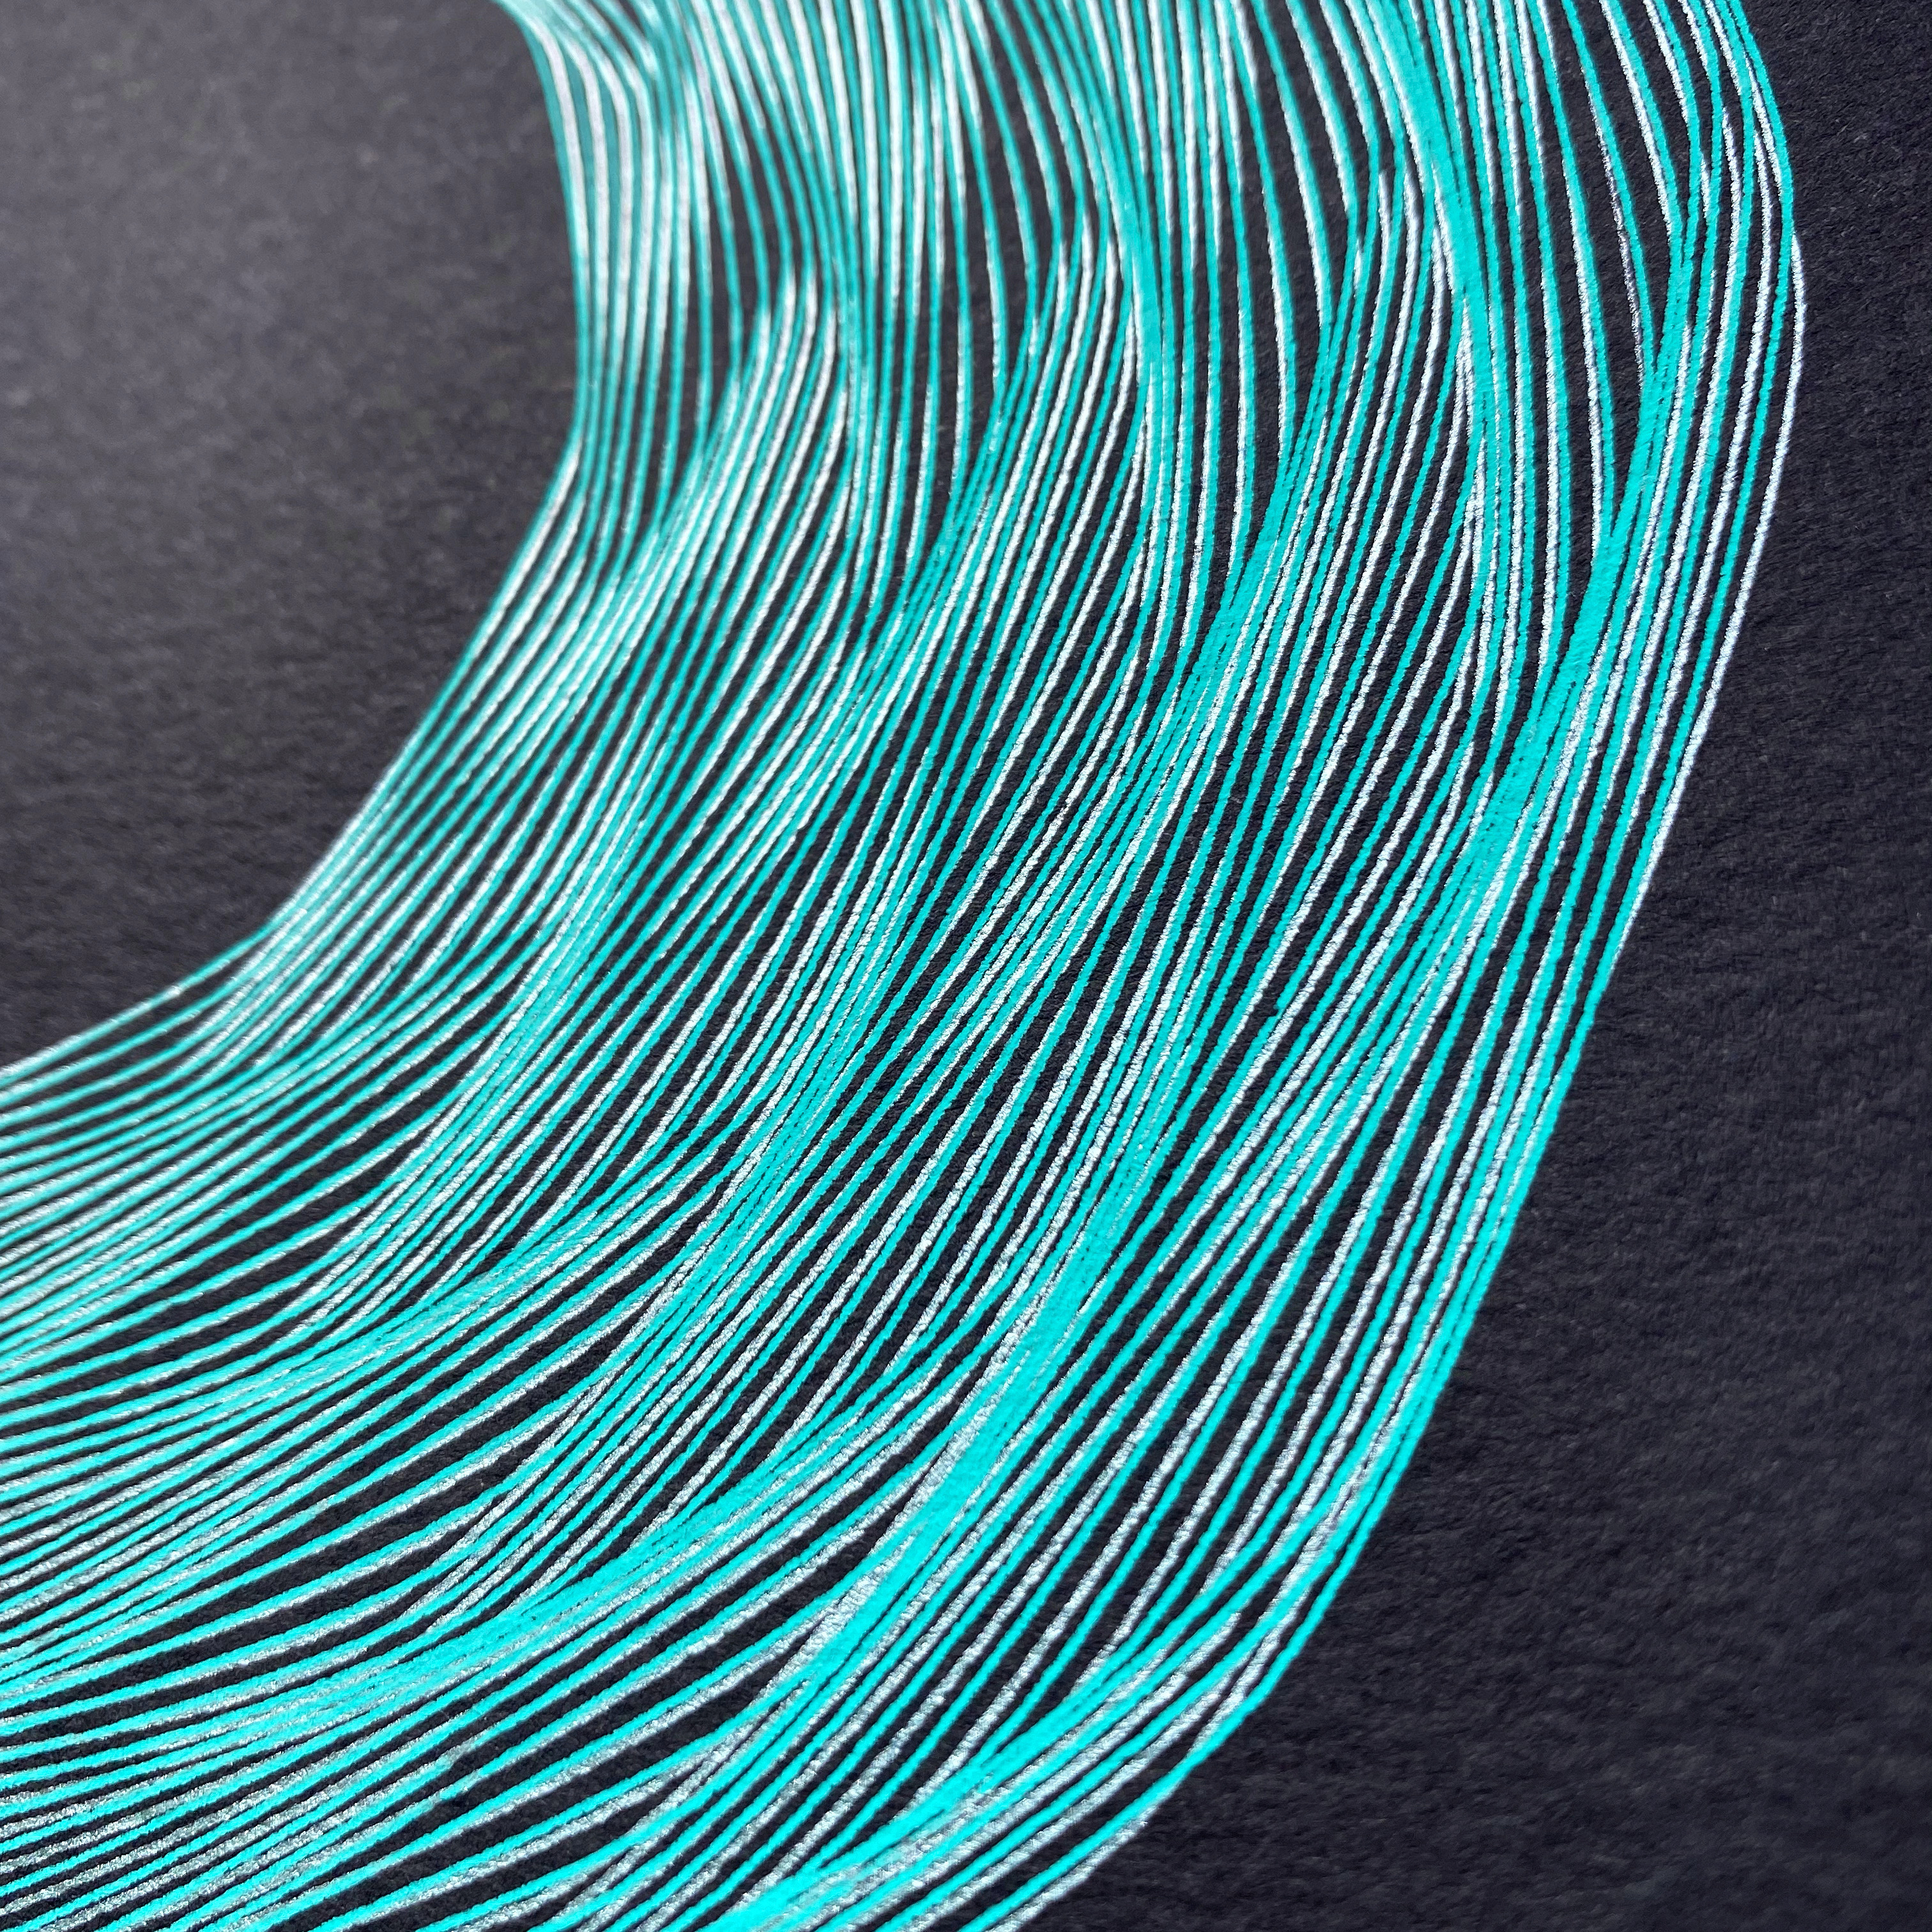 A detail photo of generative art which is made of overlapping lines in silver and metallic green on black paper.